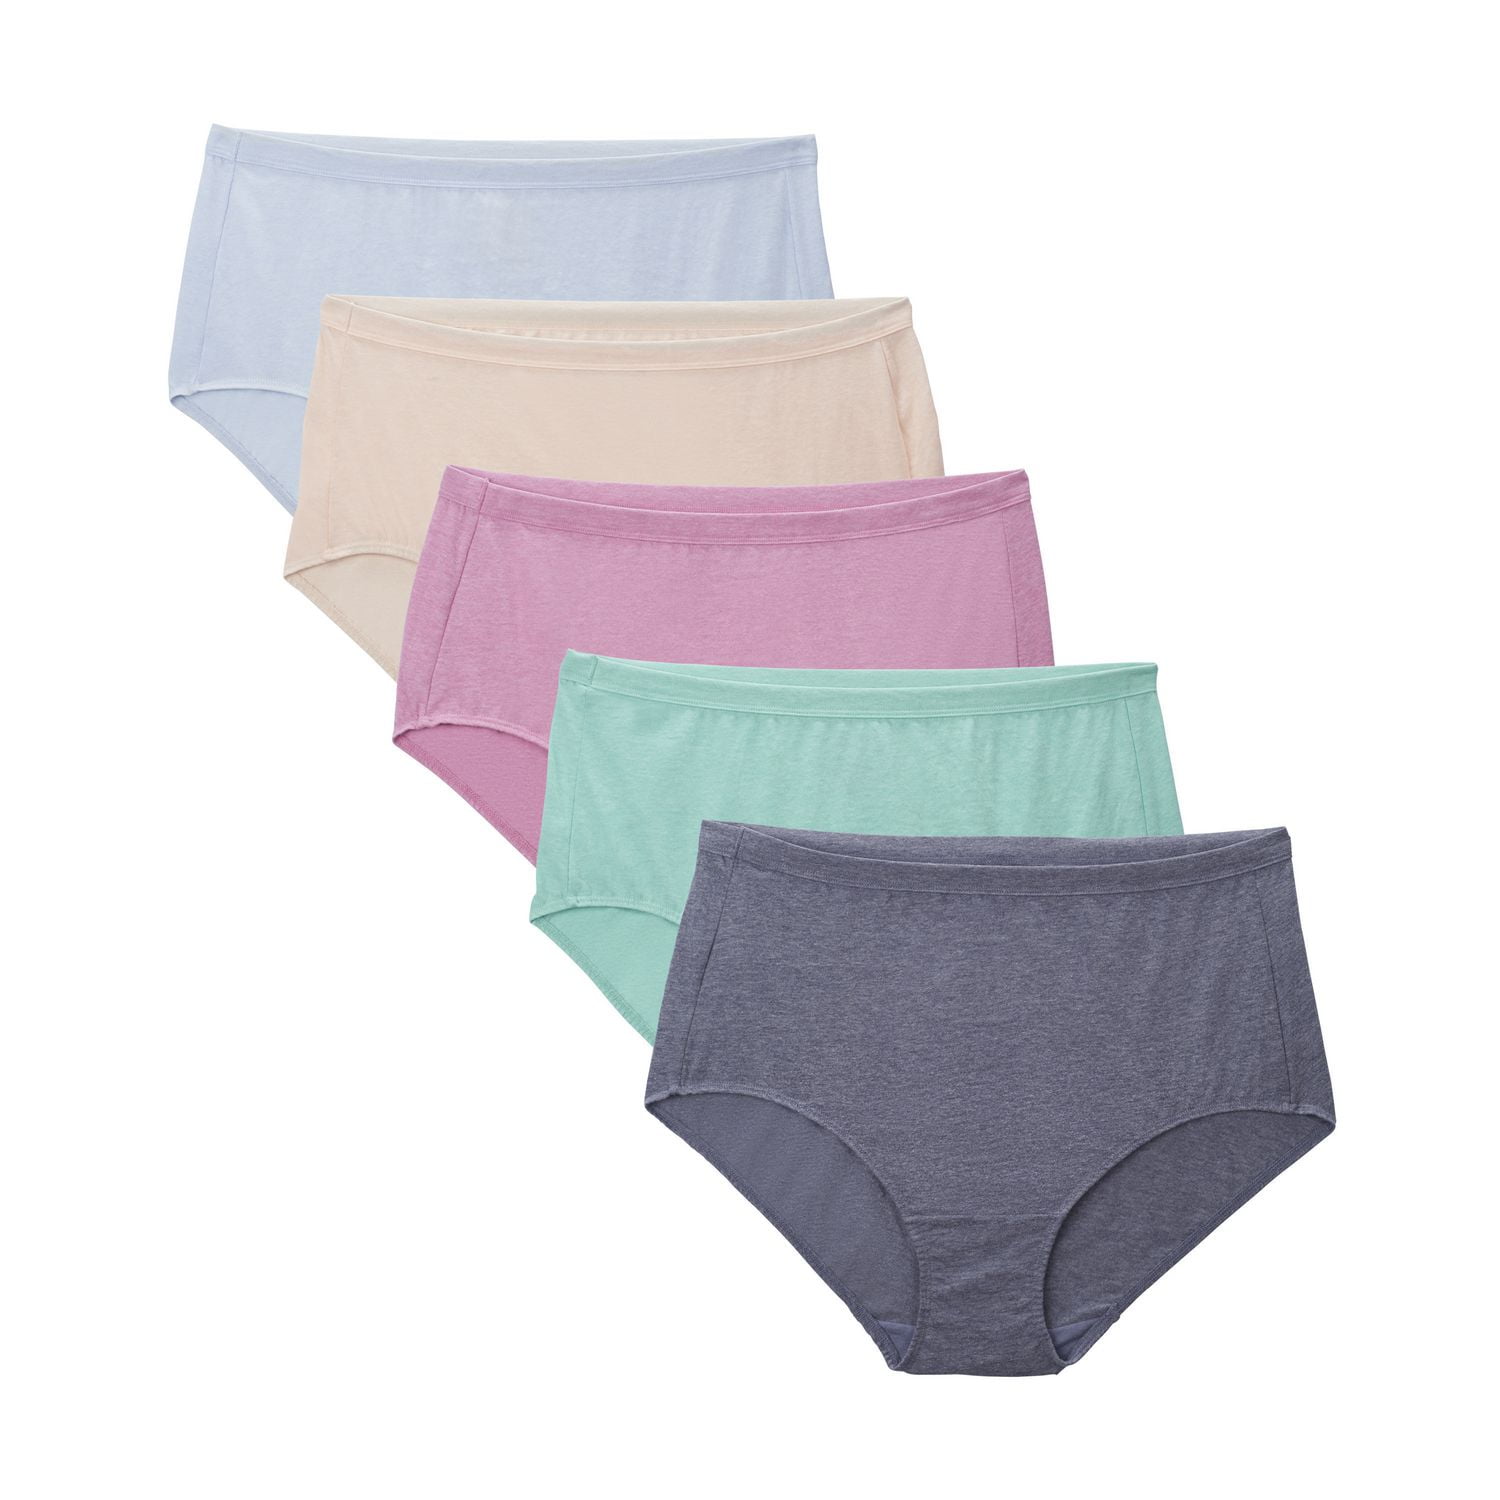 Fruit of the Loom Ladies Fit for Me beyond Soft Briefs, 5-Pack